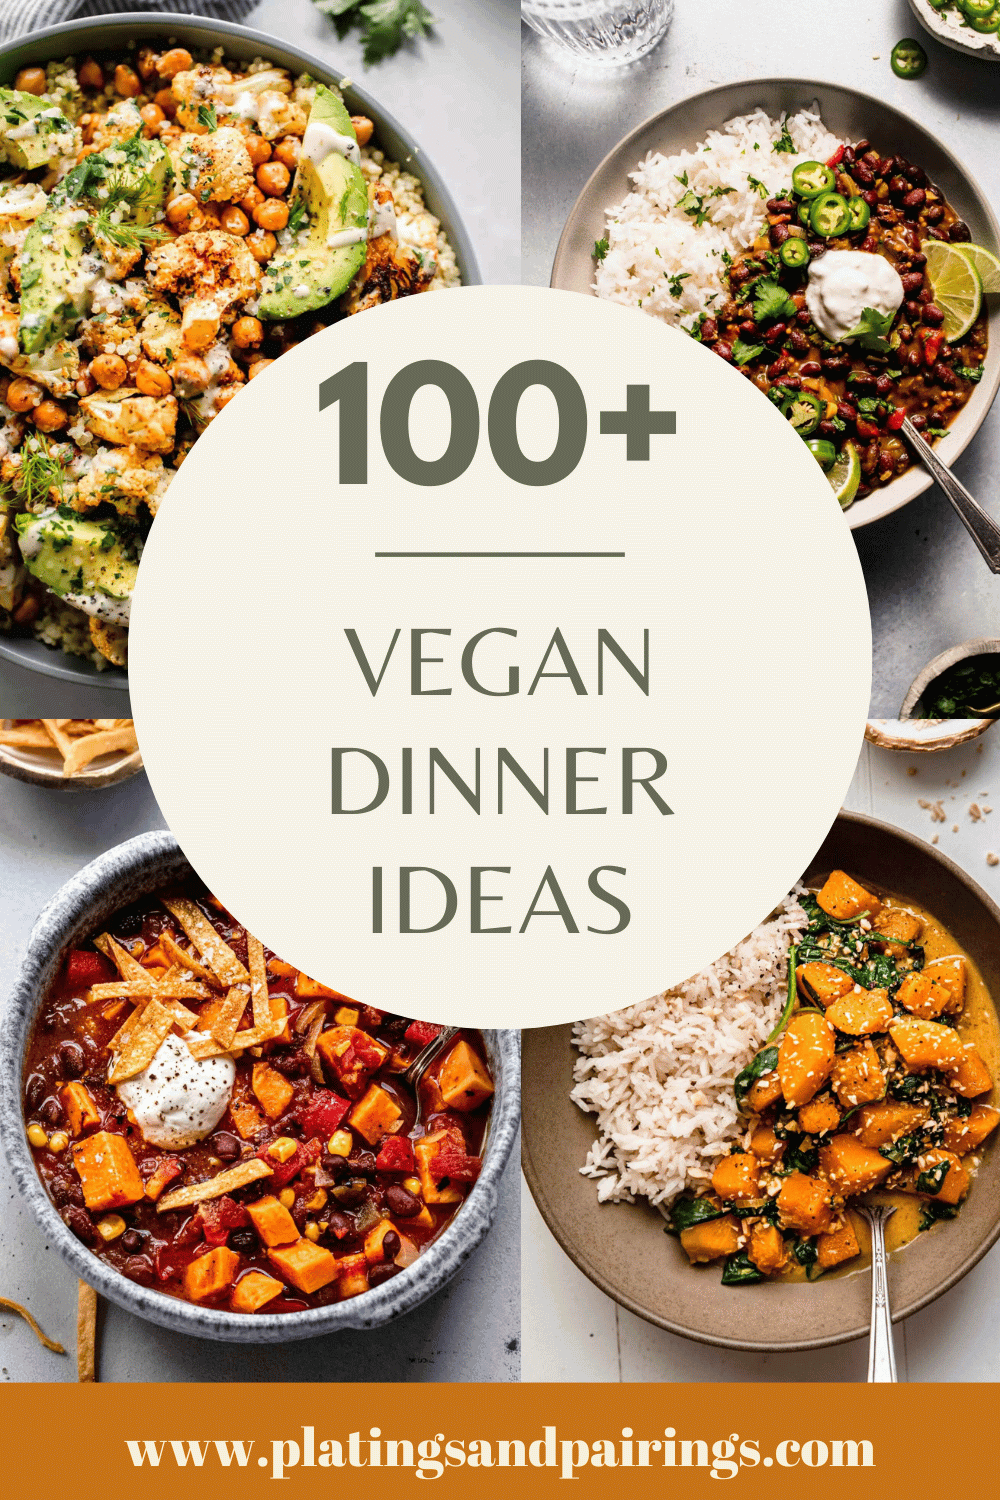 Collage of vegan dinner recipes with text overlay.